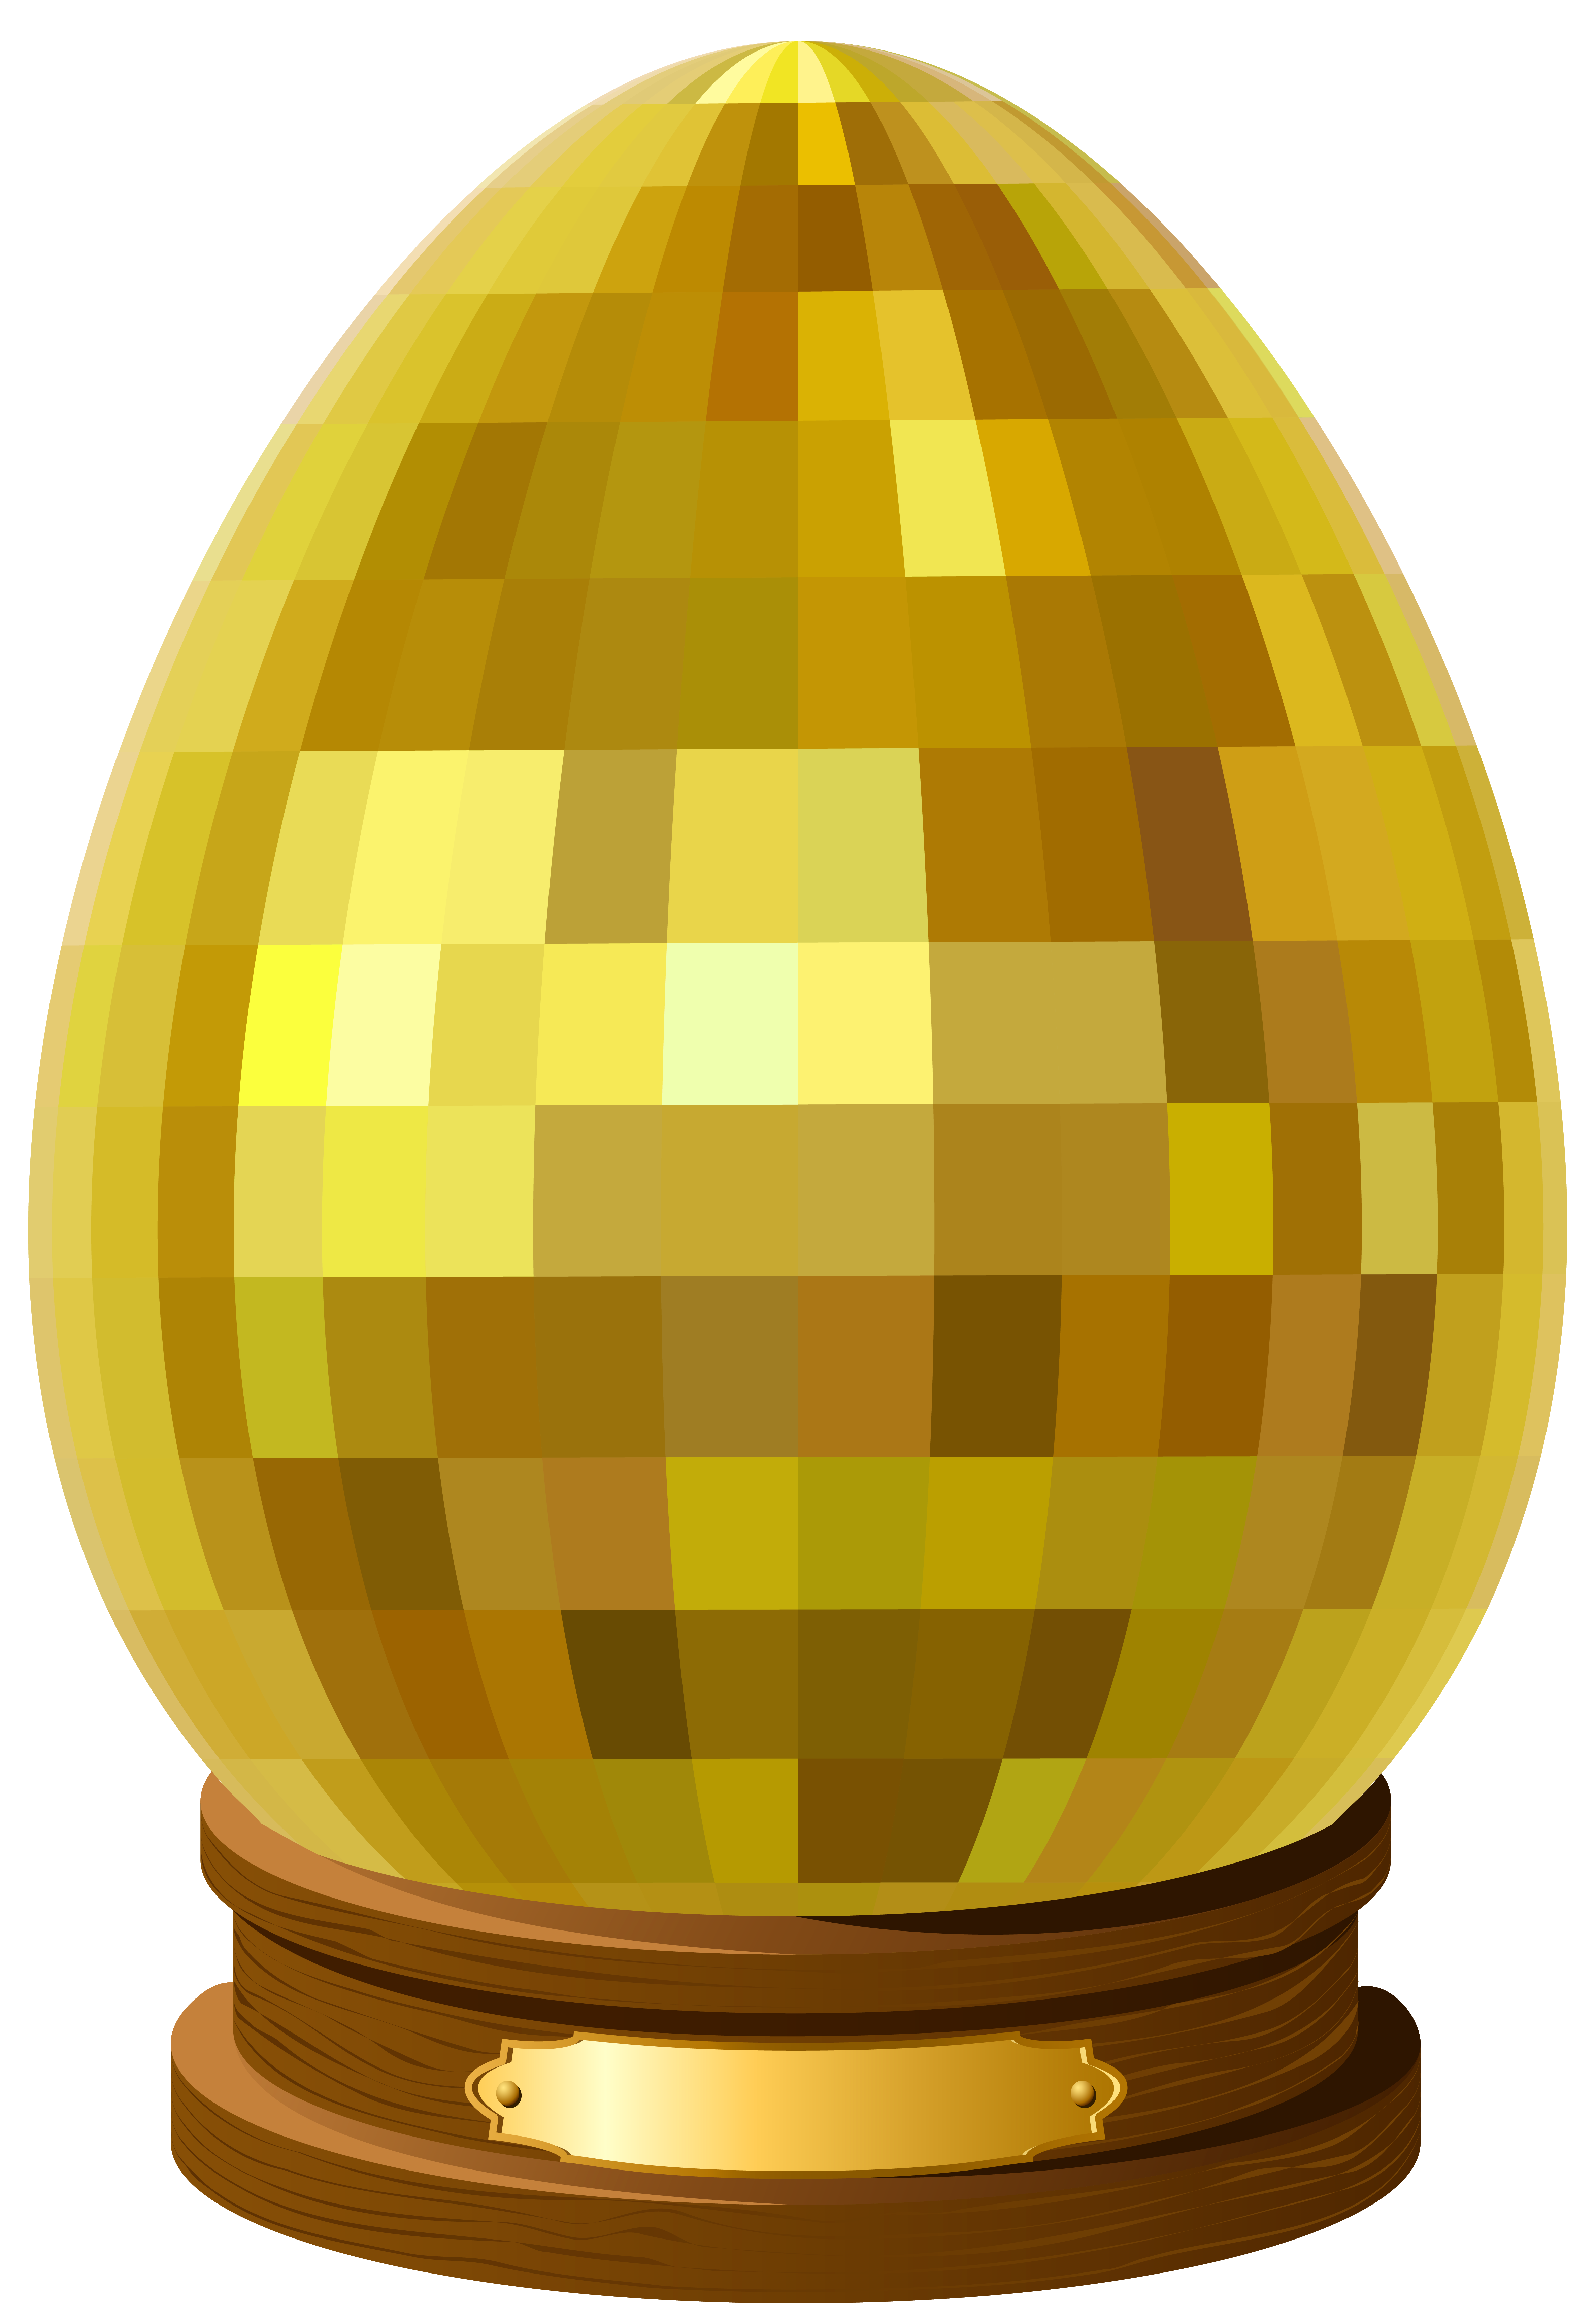 Gold Easter Egg Hd Transparent, Gold And Silver Easter Eggs For Day, Easter  Clipart, Easter, Egg PNG Image For Free Download